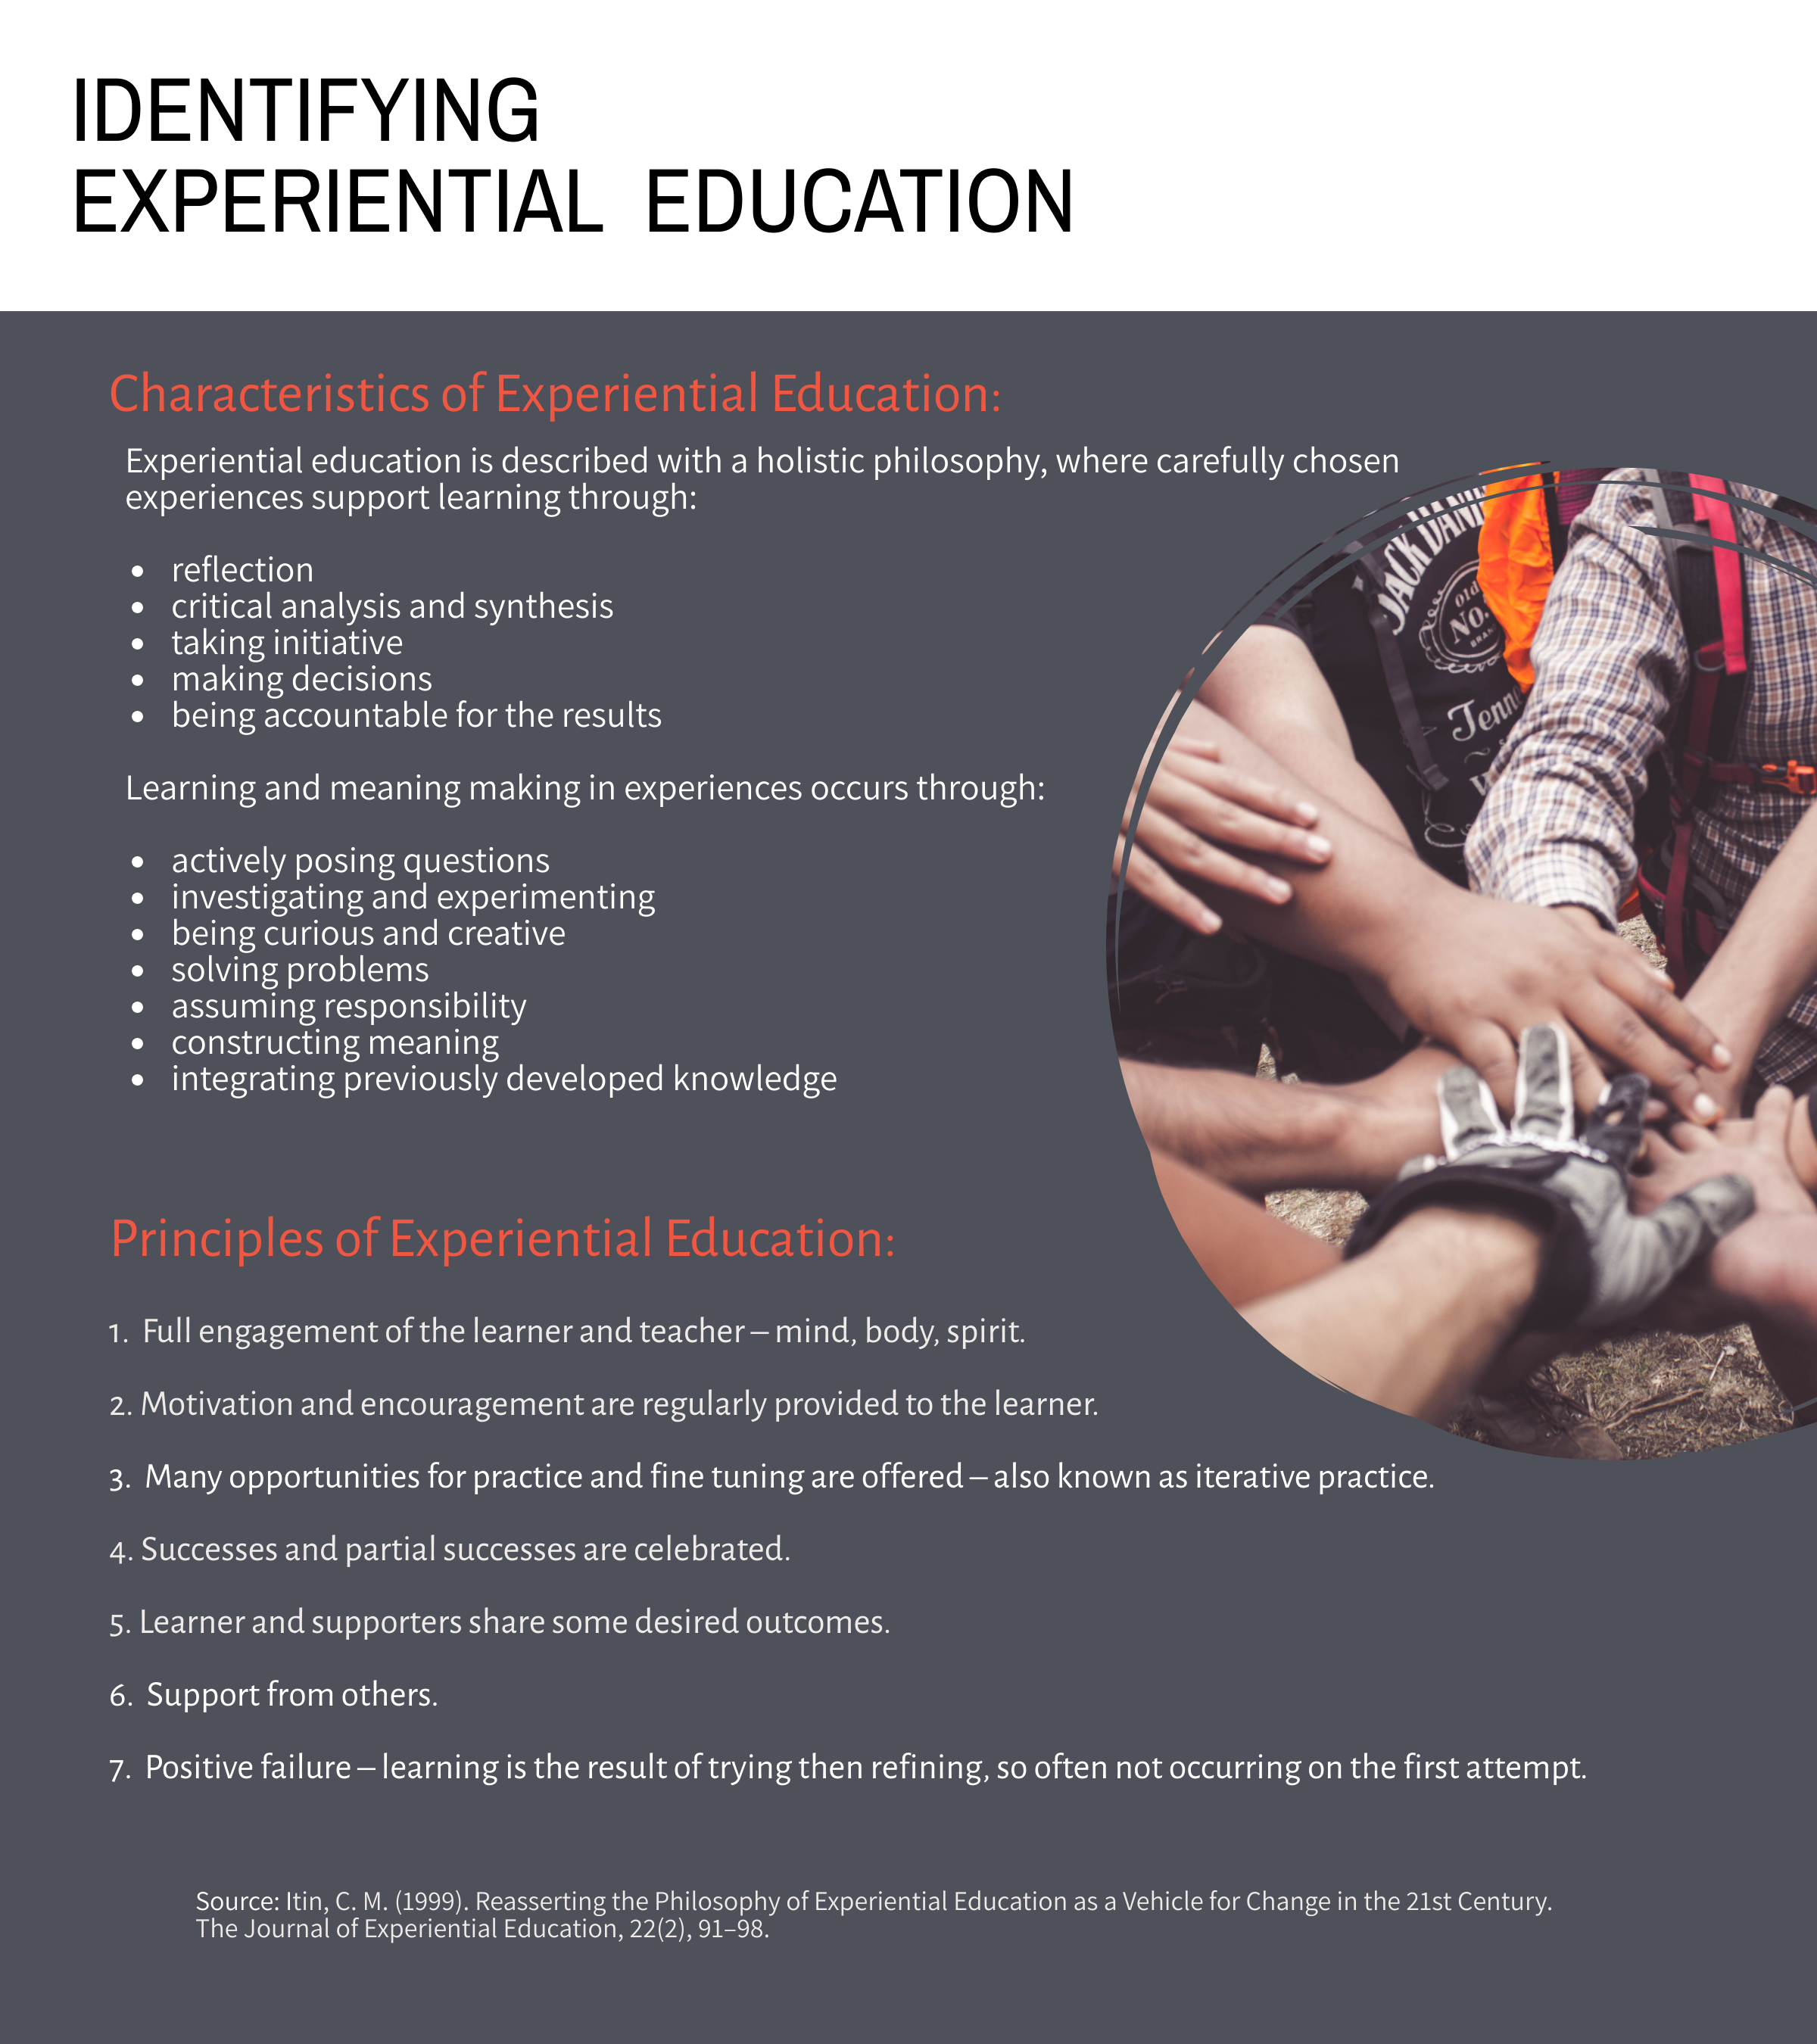 Identifying Experiential Education